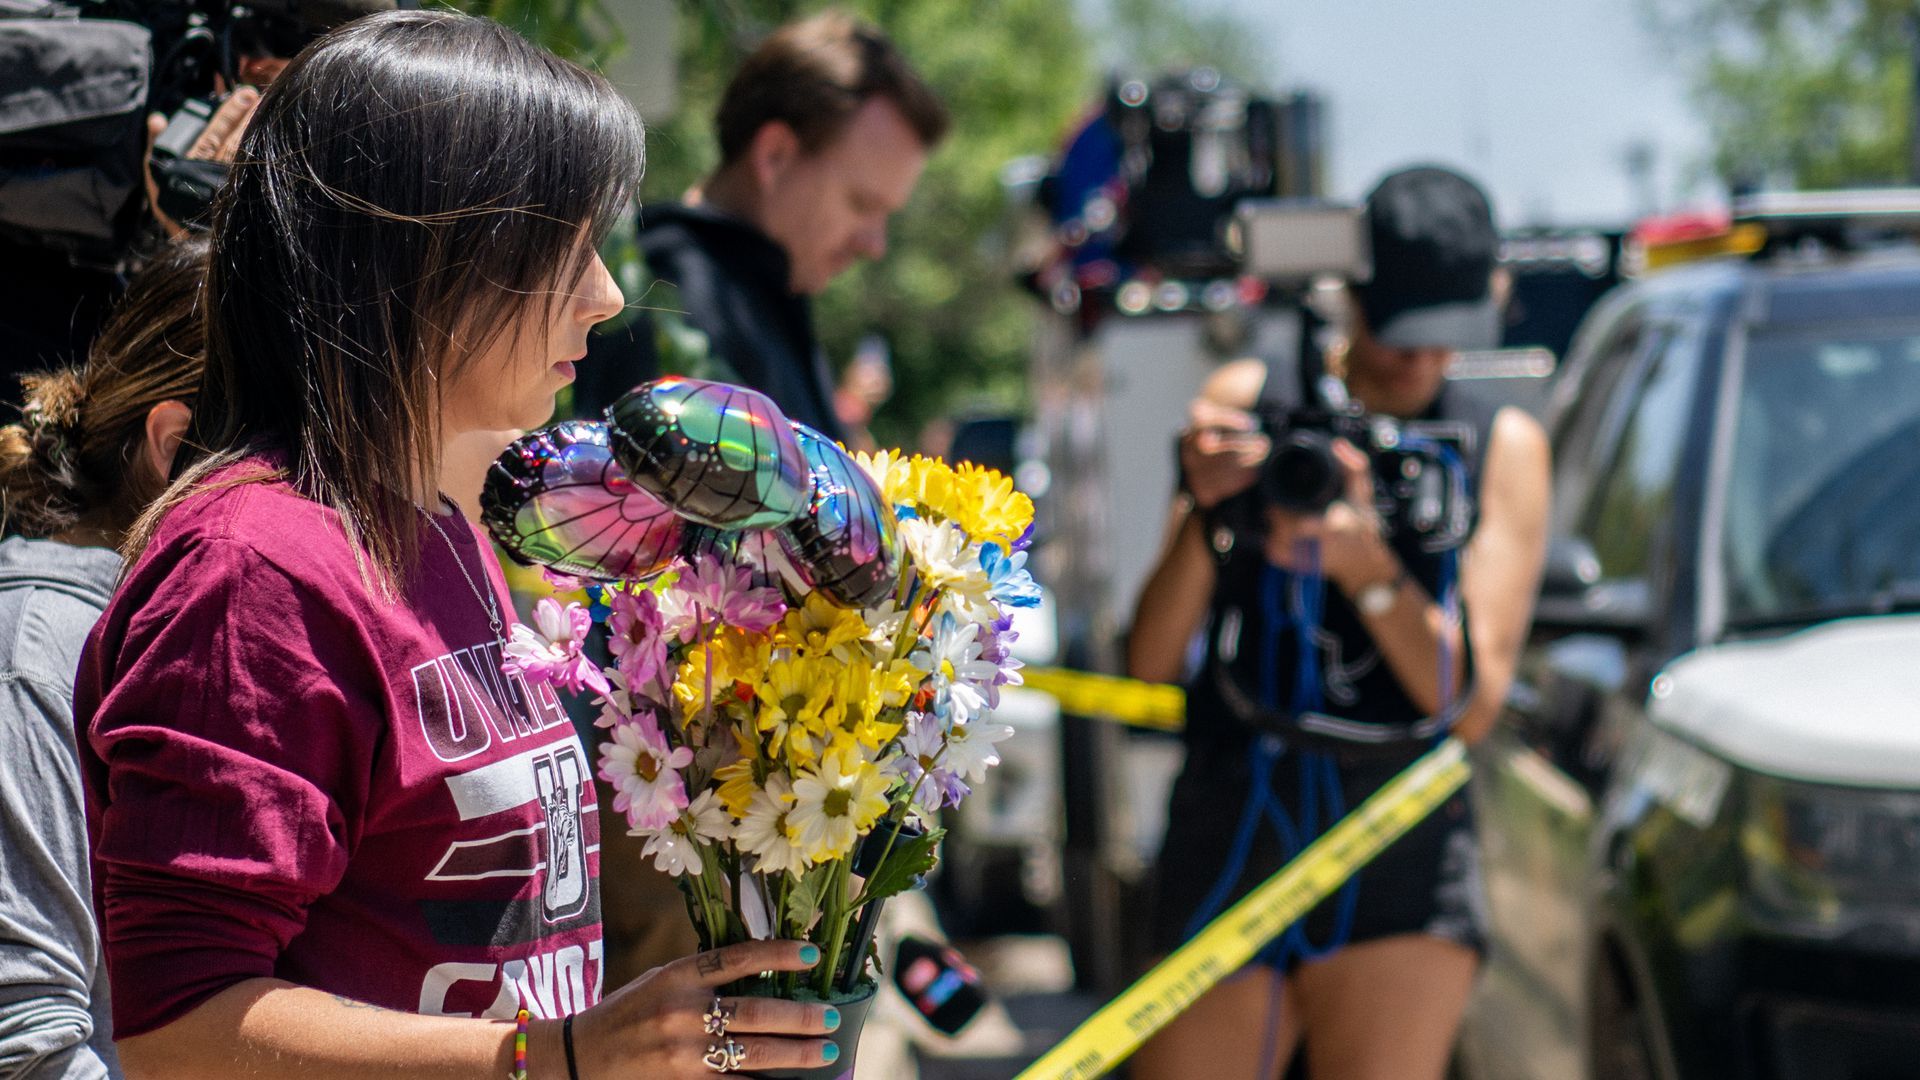 A woman brings lowers to a makeshift memorial. Photo: Brandon Bell/Getty Images